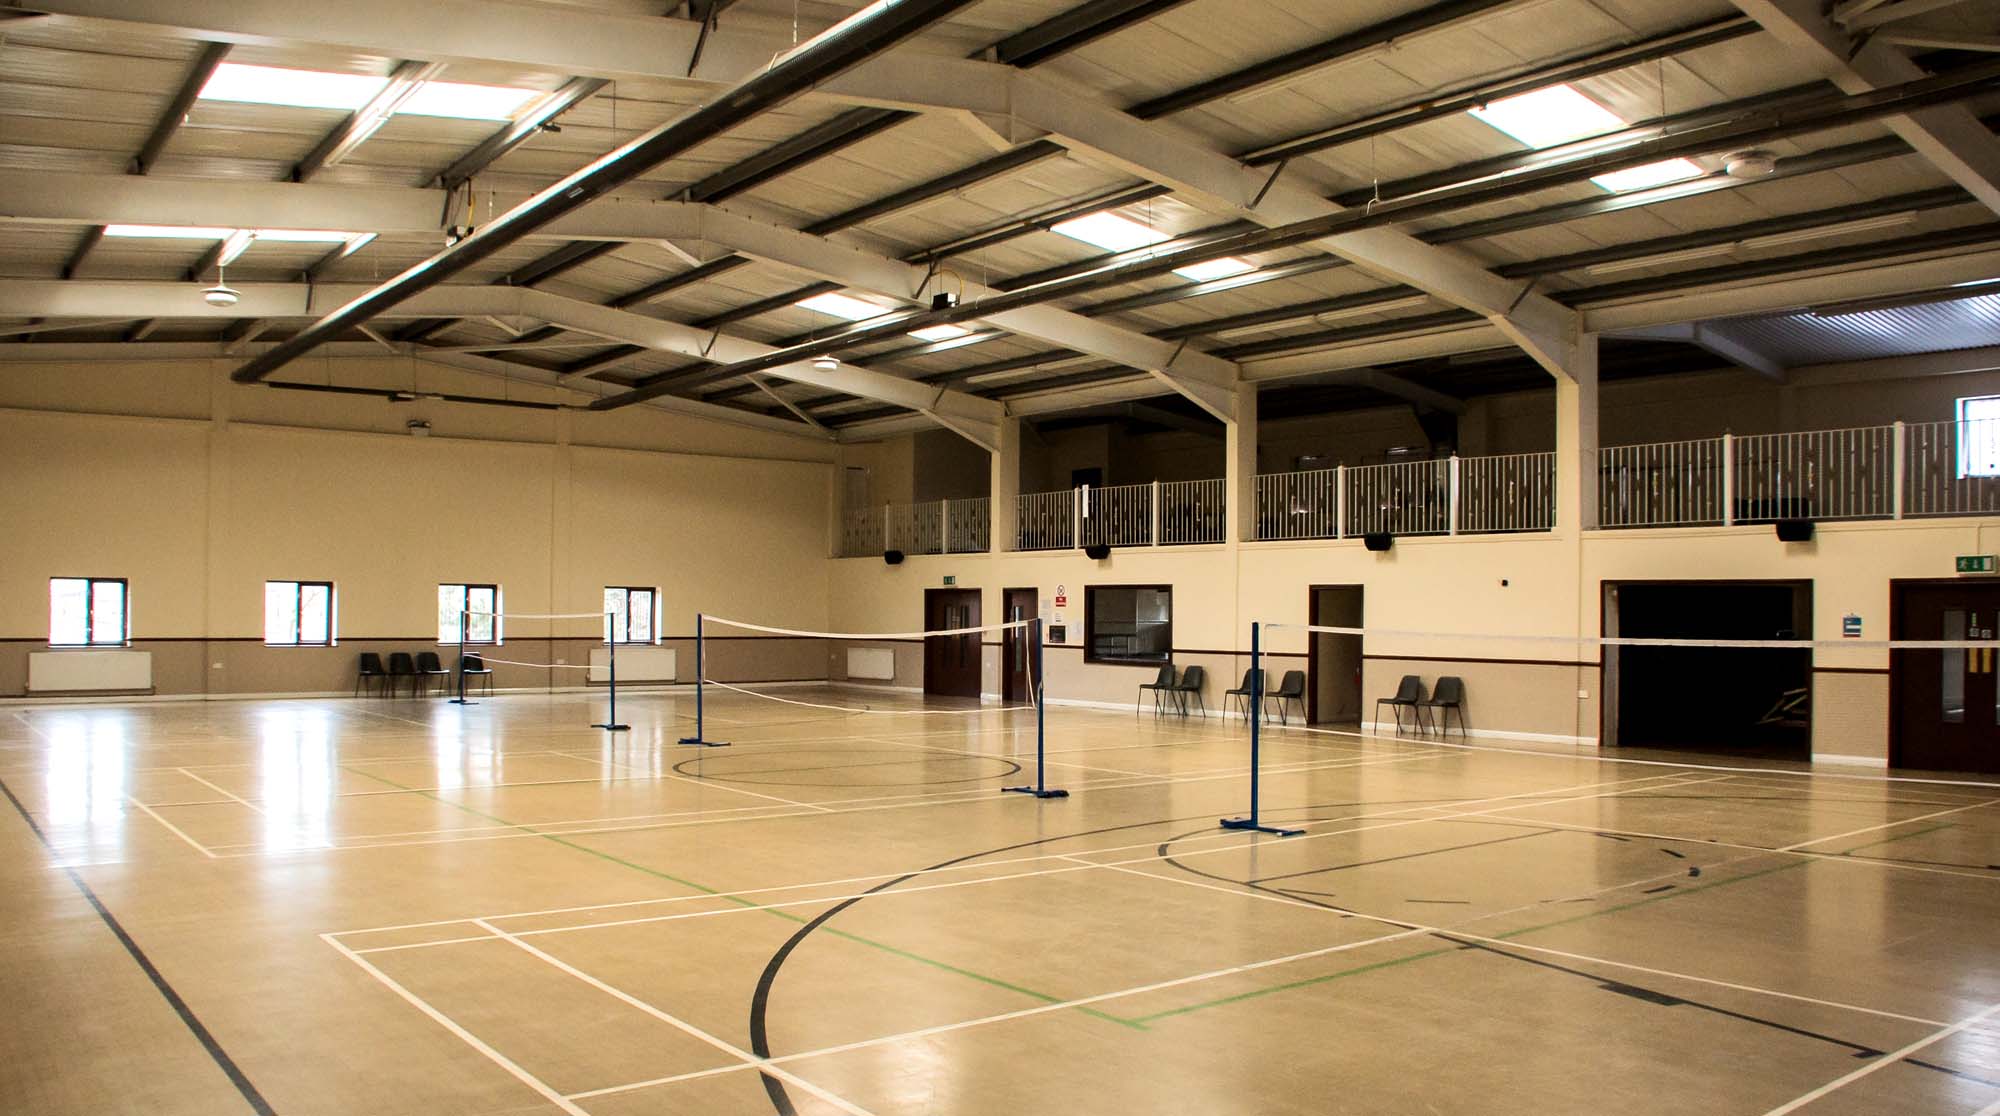 The Central Mosque complex has various facilities including a sport hall - 